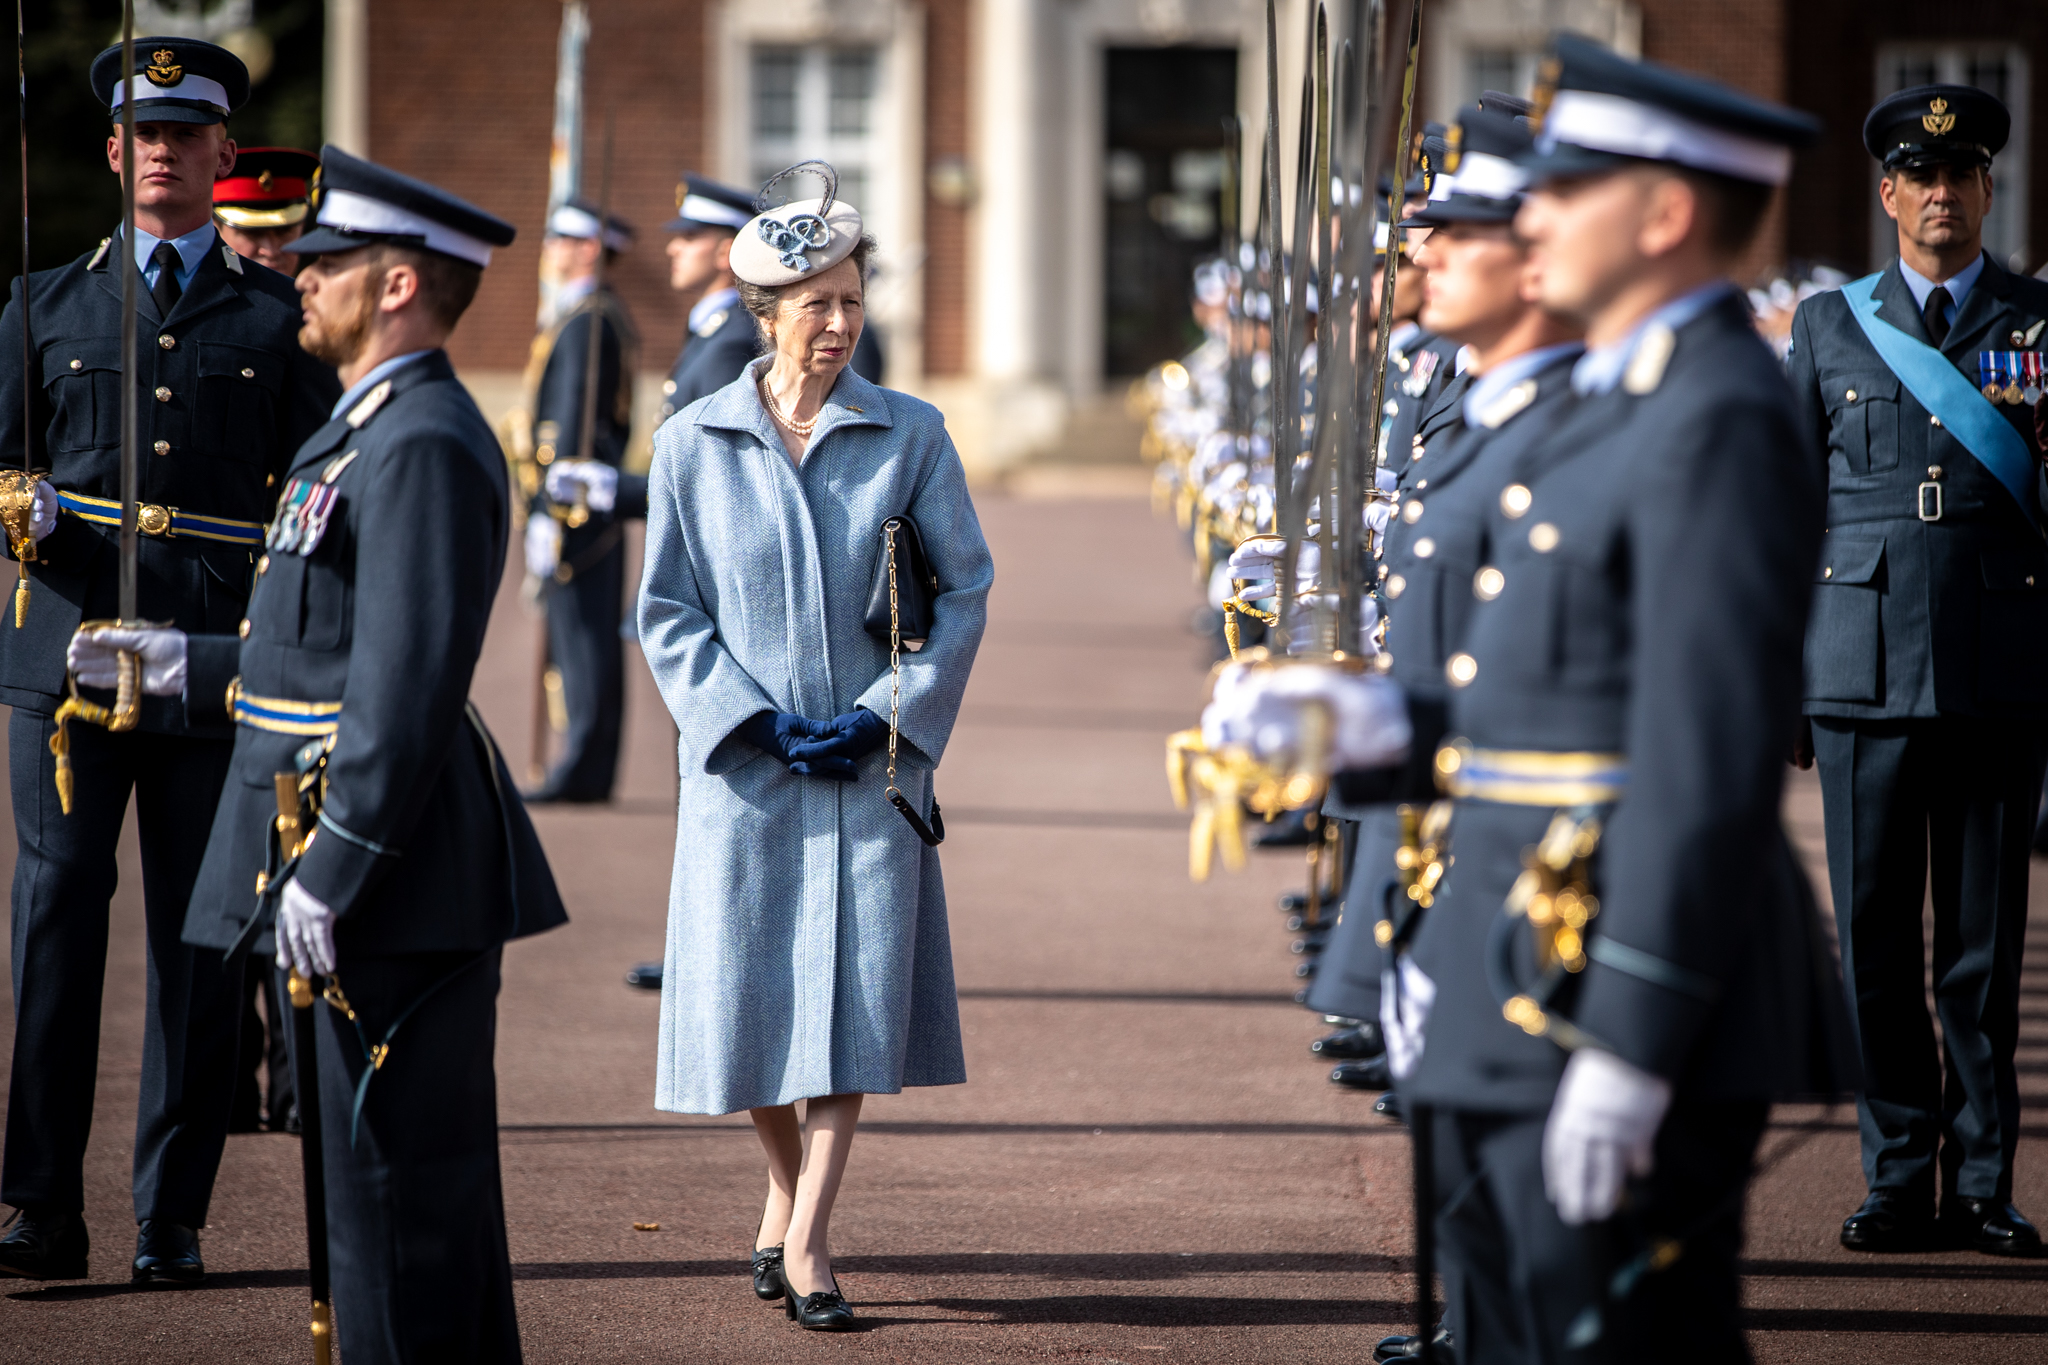 Her Royal Highness talks to personnel with their parade swords.